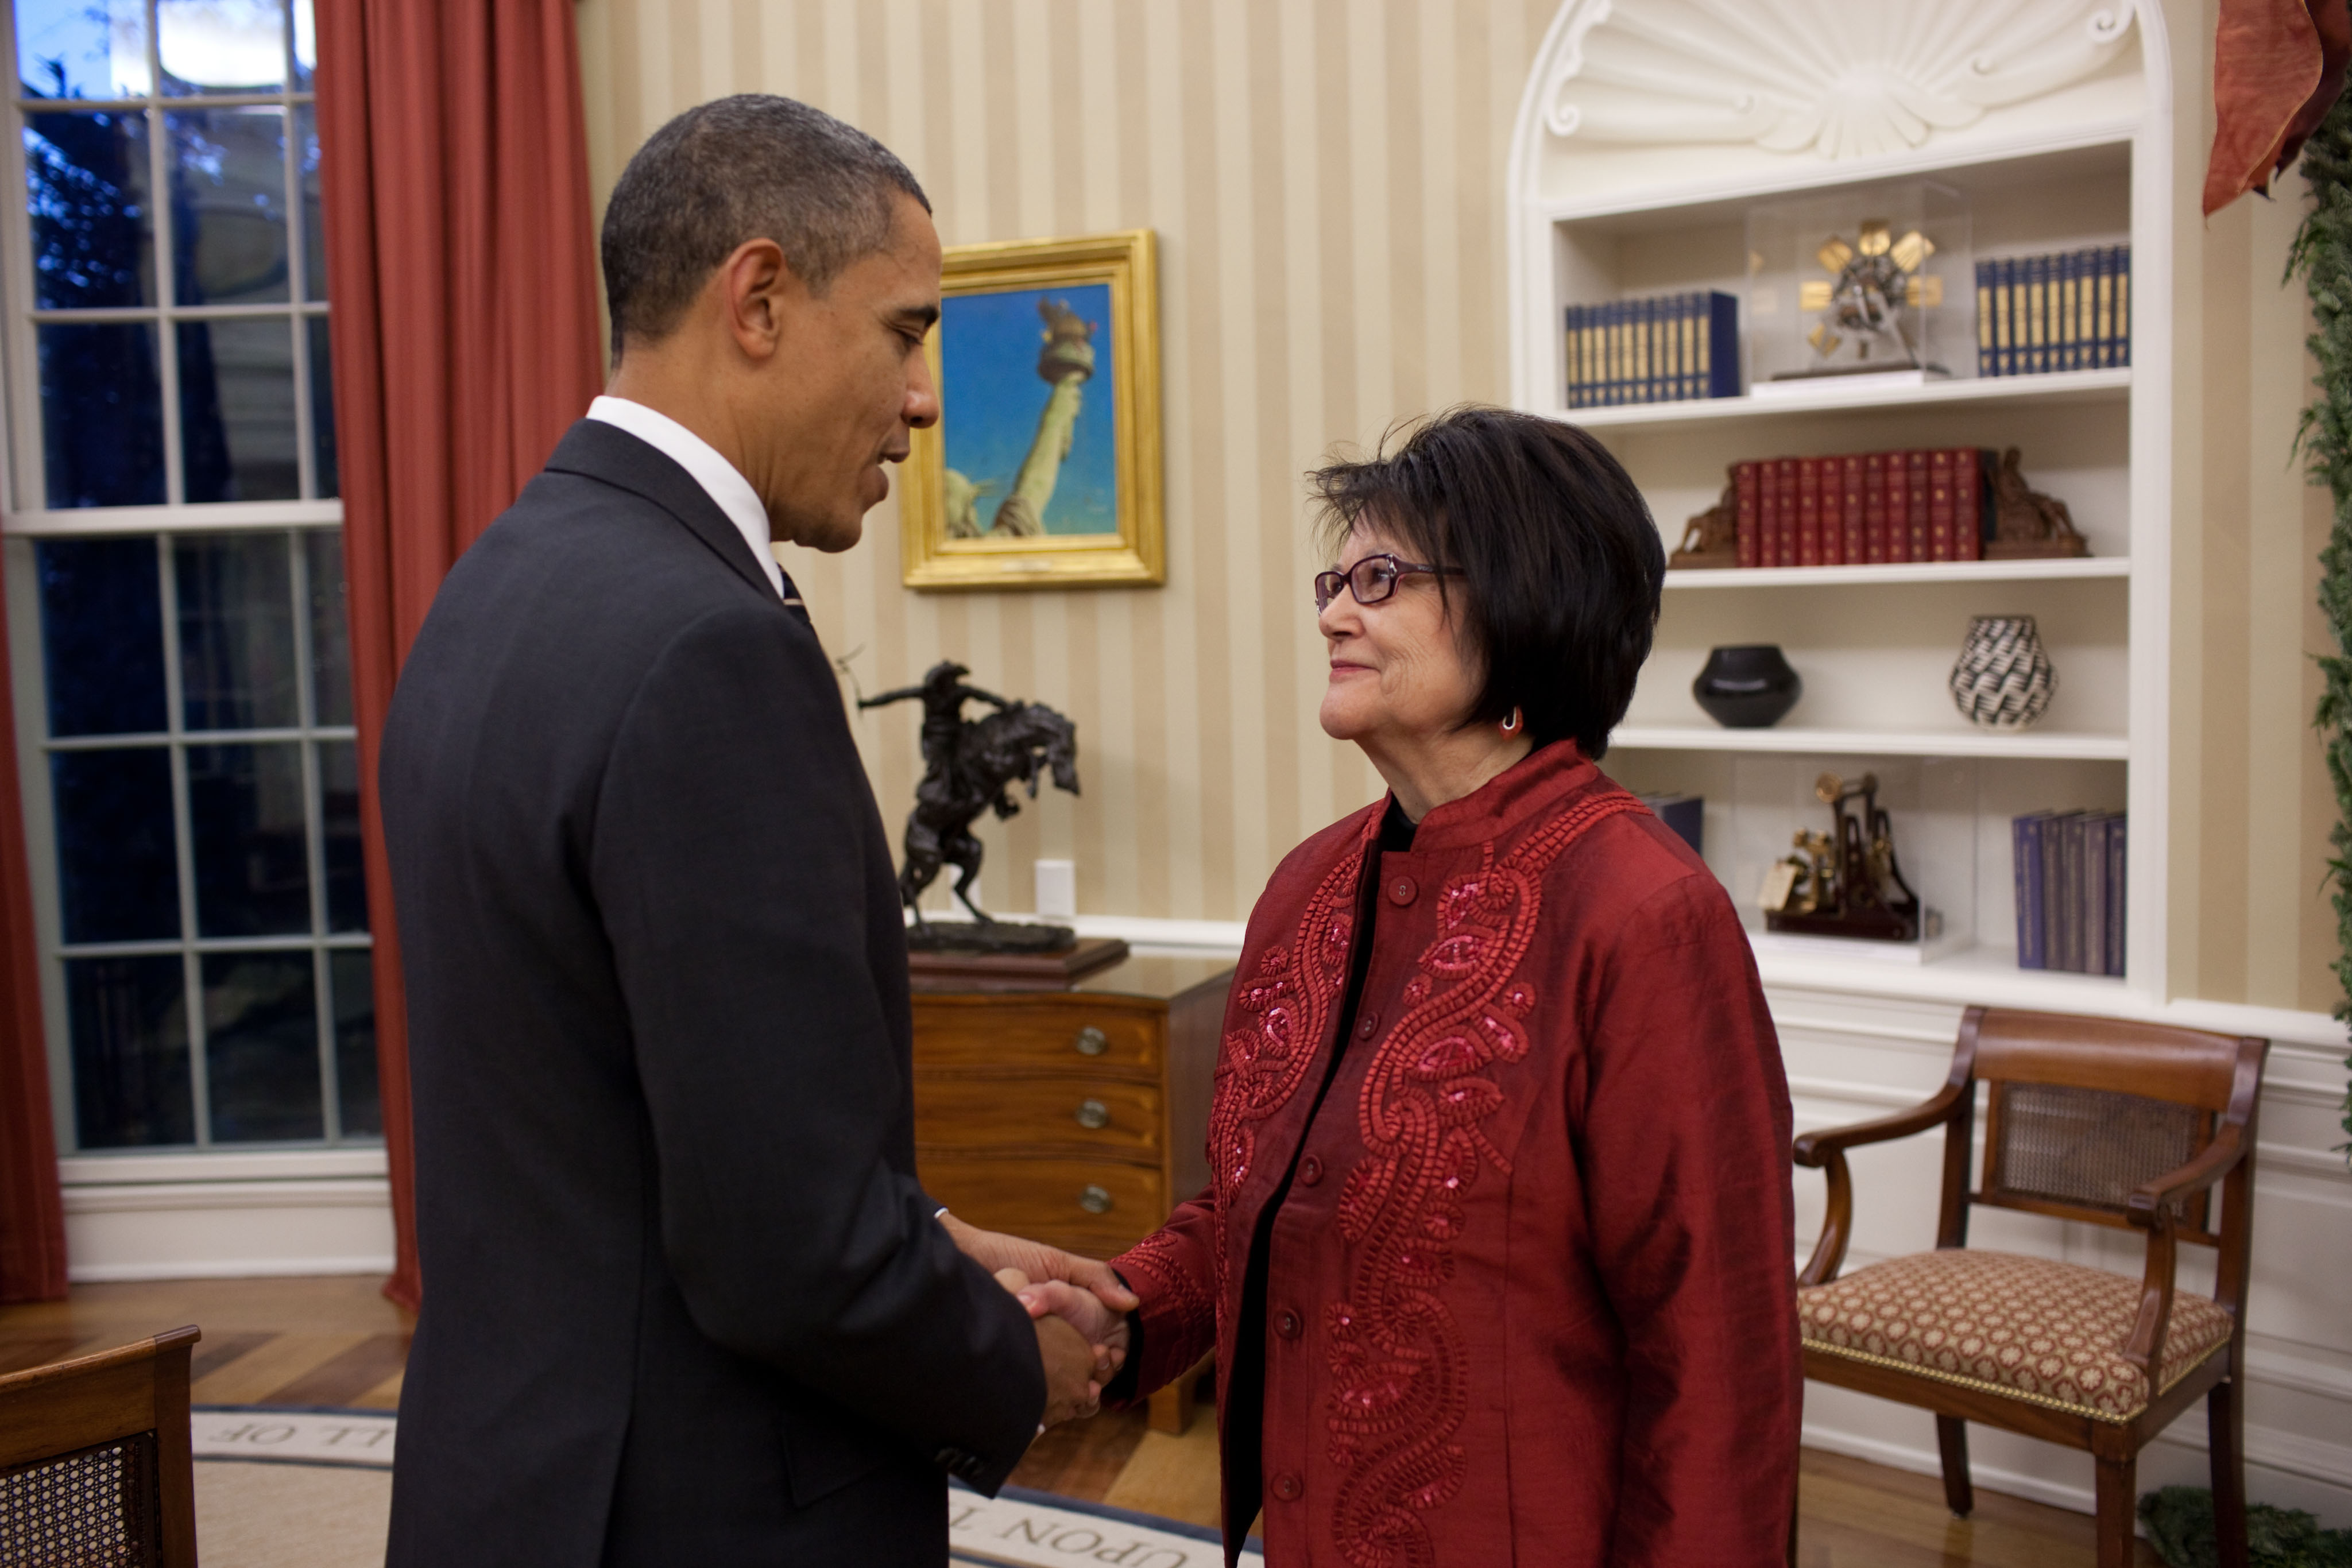 Payments from $3.4B Cobell trust settlement could go out soon 